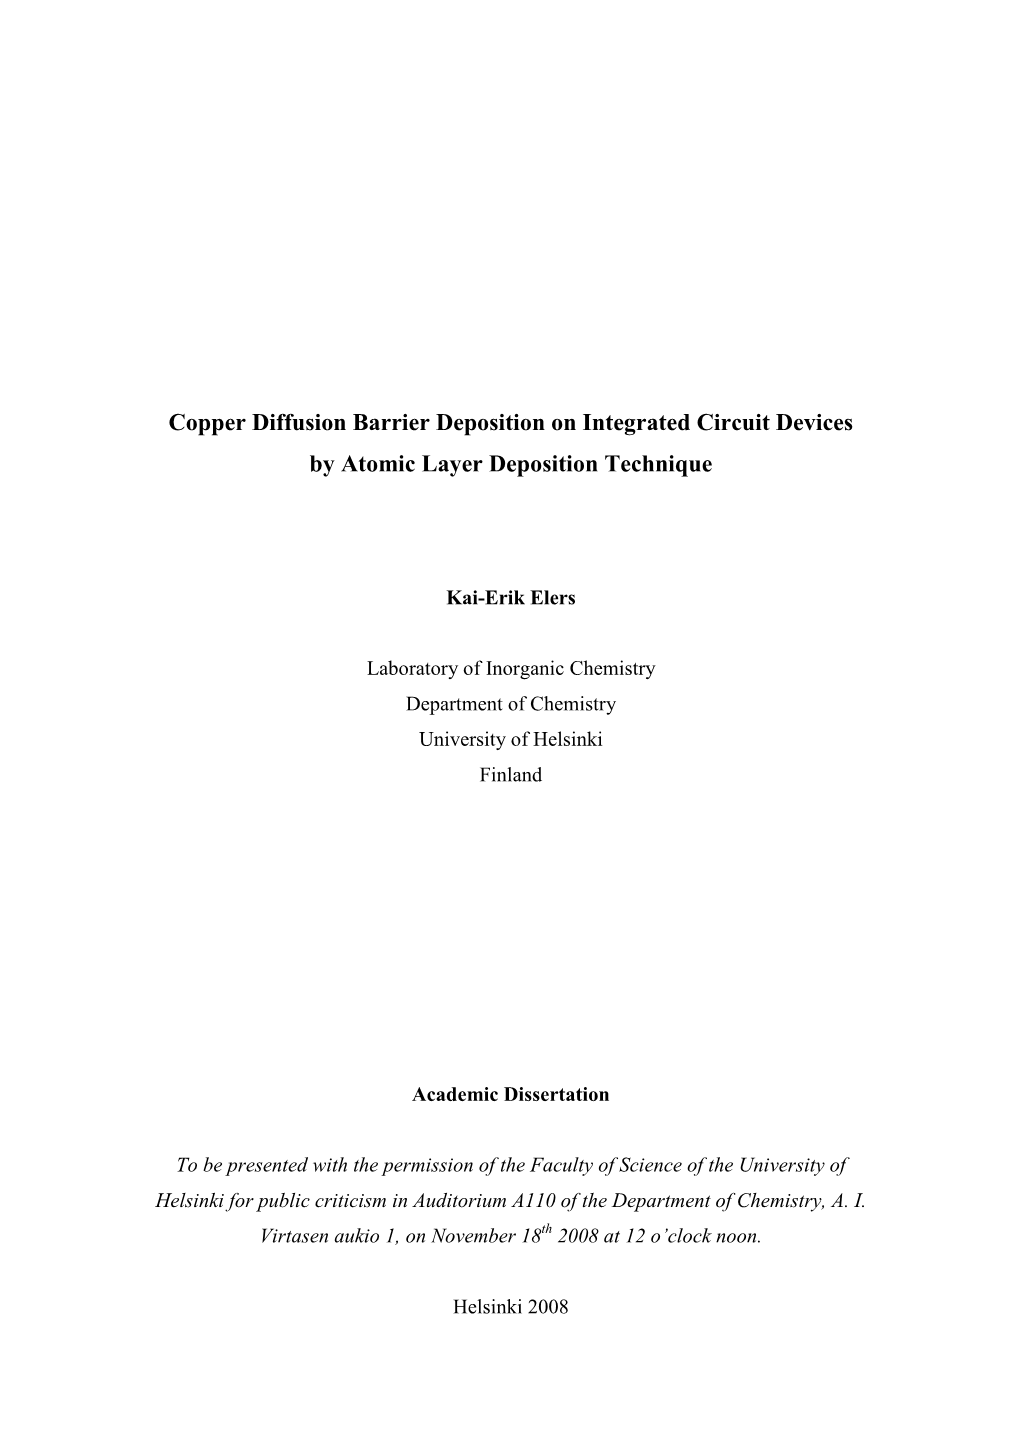 Copper Diffusion Barrier Deposition on Integrated Circuit Devices by Atomic Layer Deposition Technique